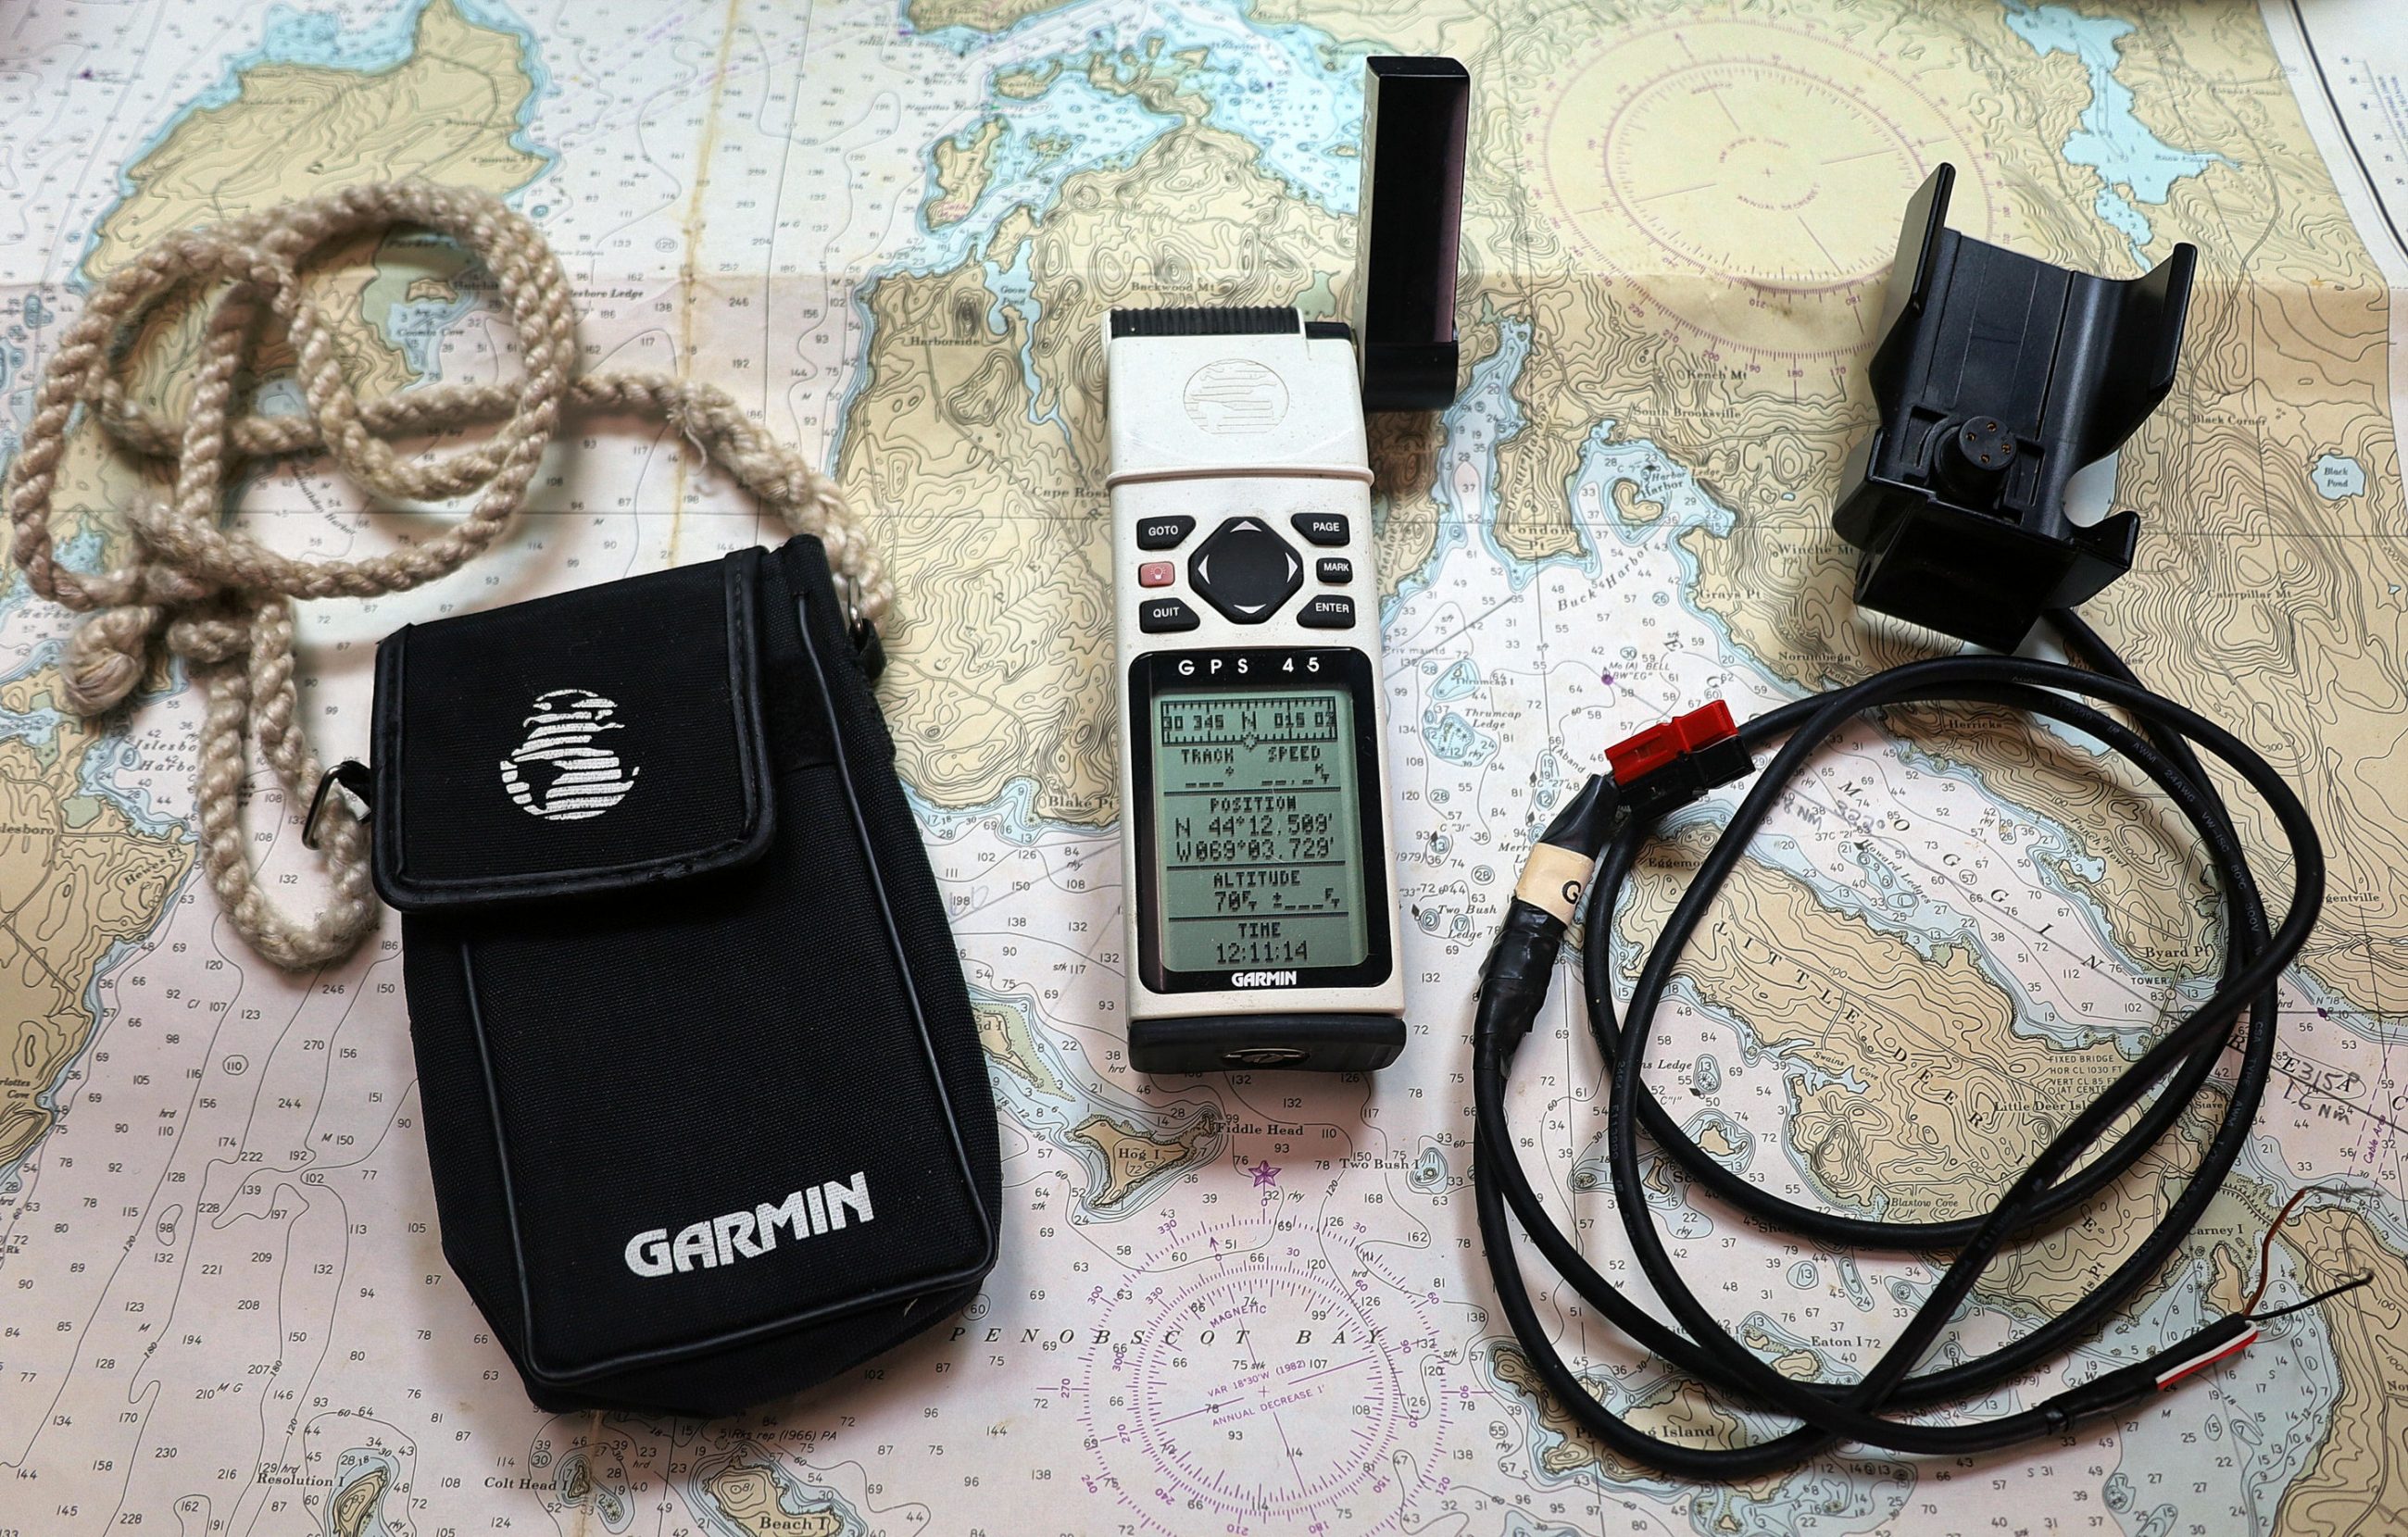 My Garmin GPS 45 was amazing in 1994, and it still works (mostly